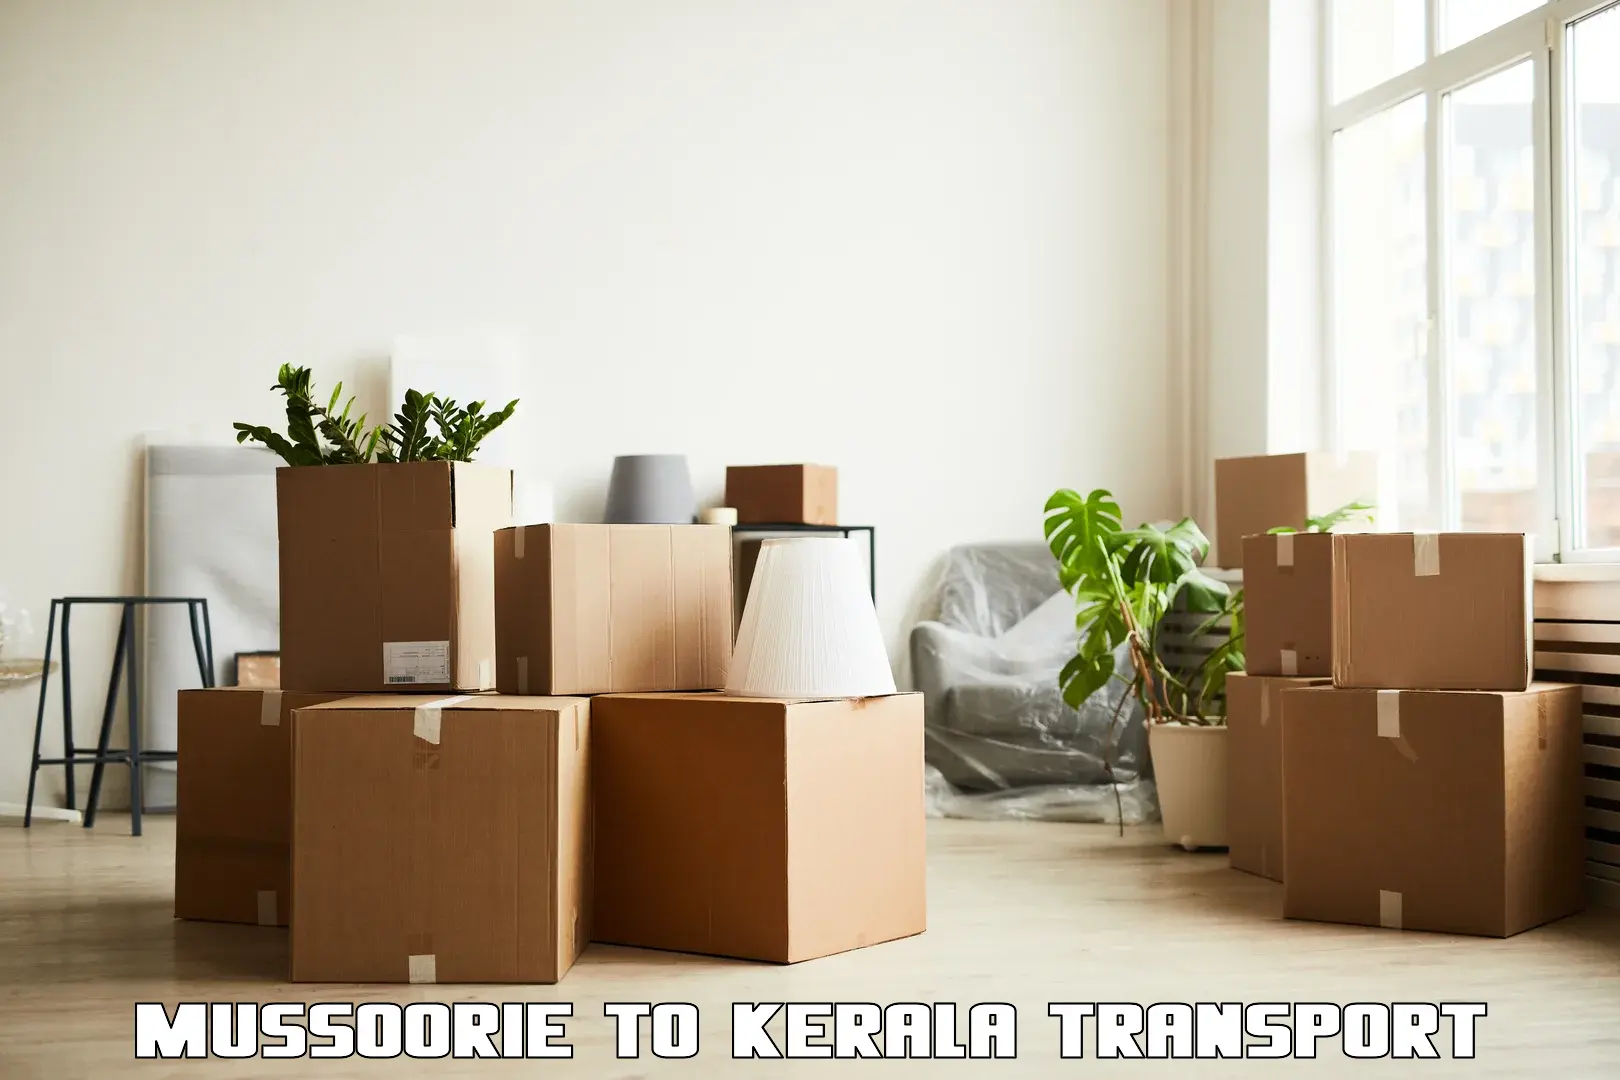 Express transport services Mussoorie to Perinthalmanna